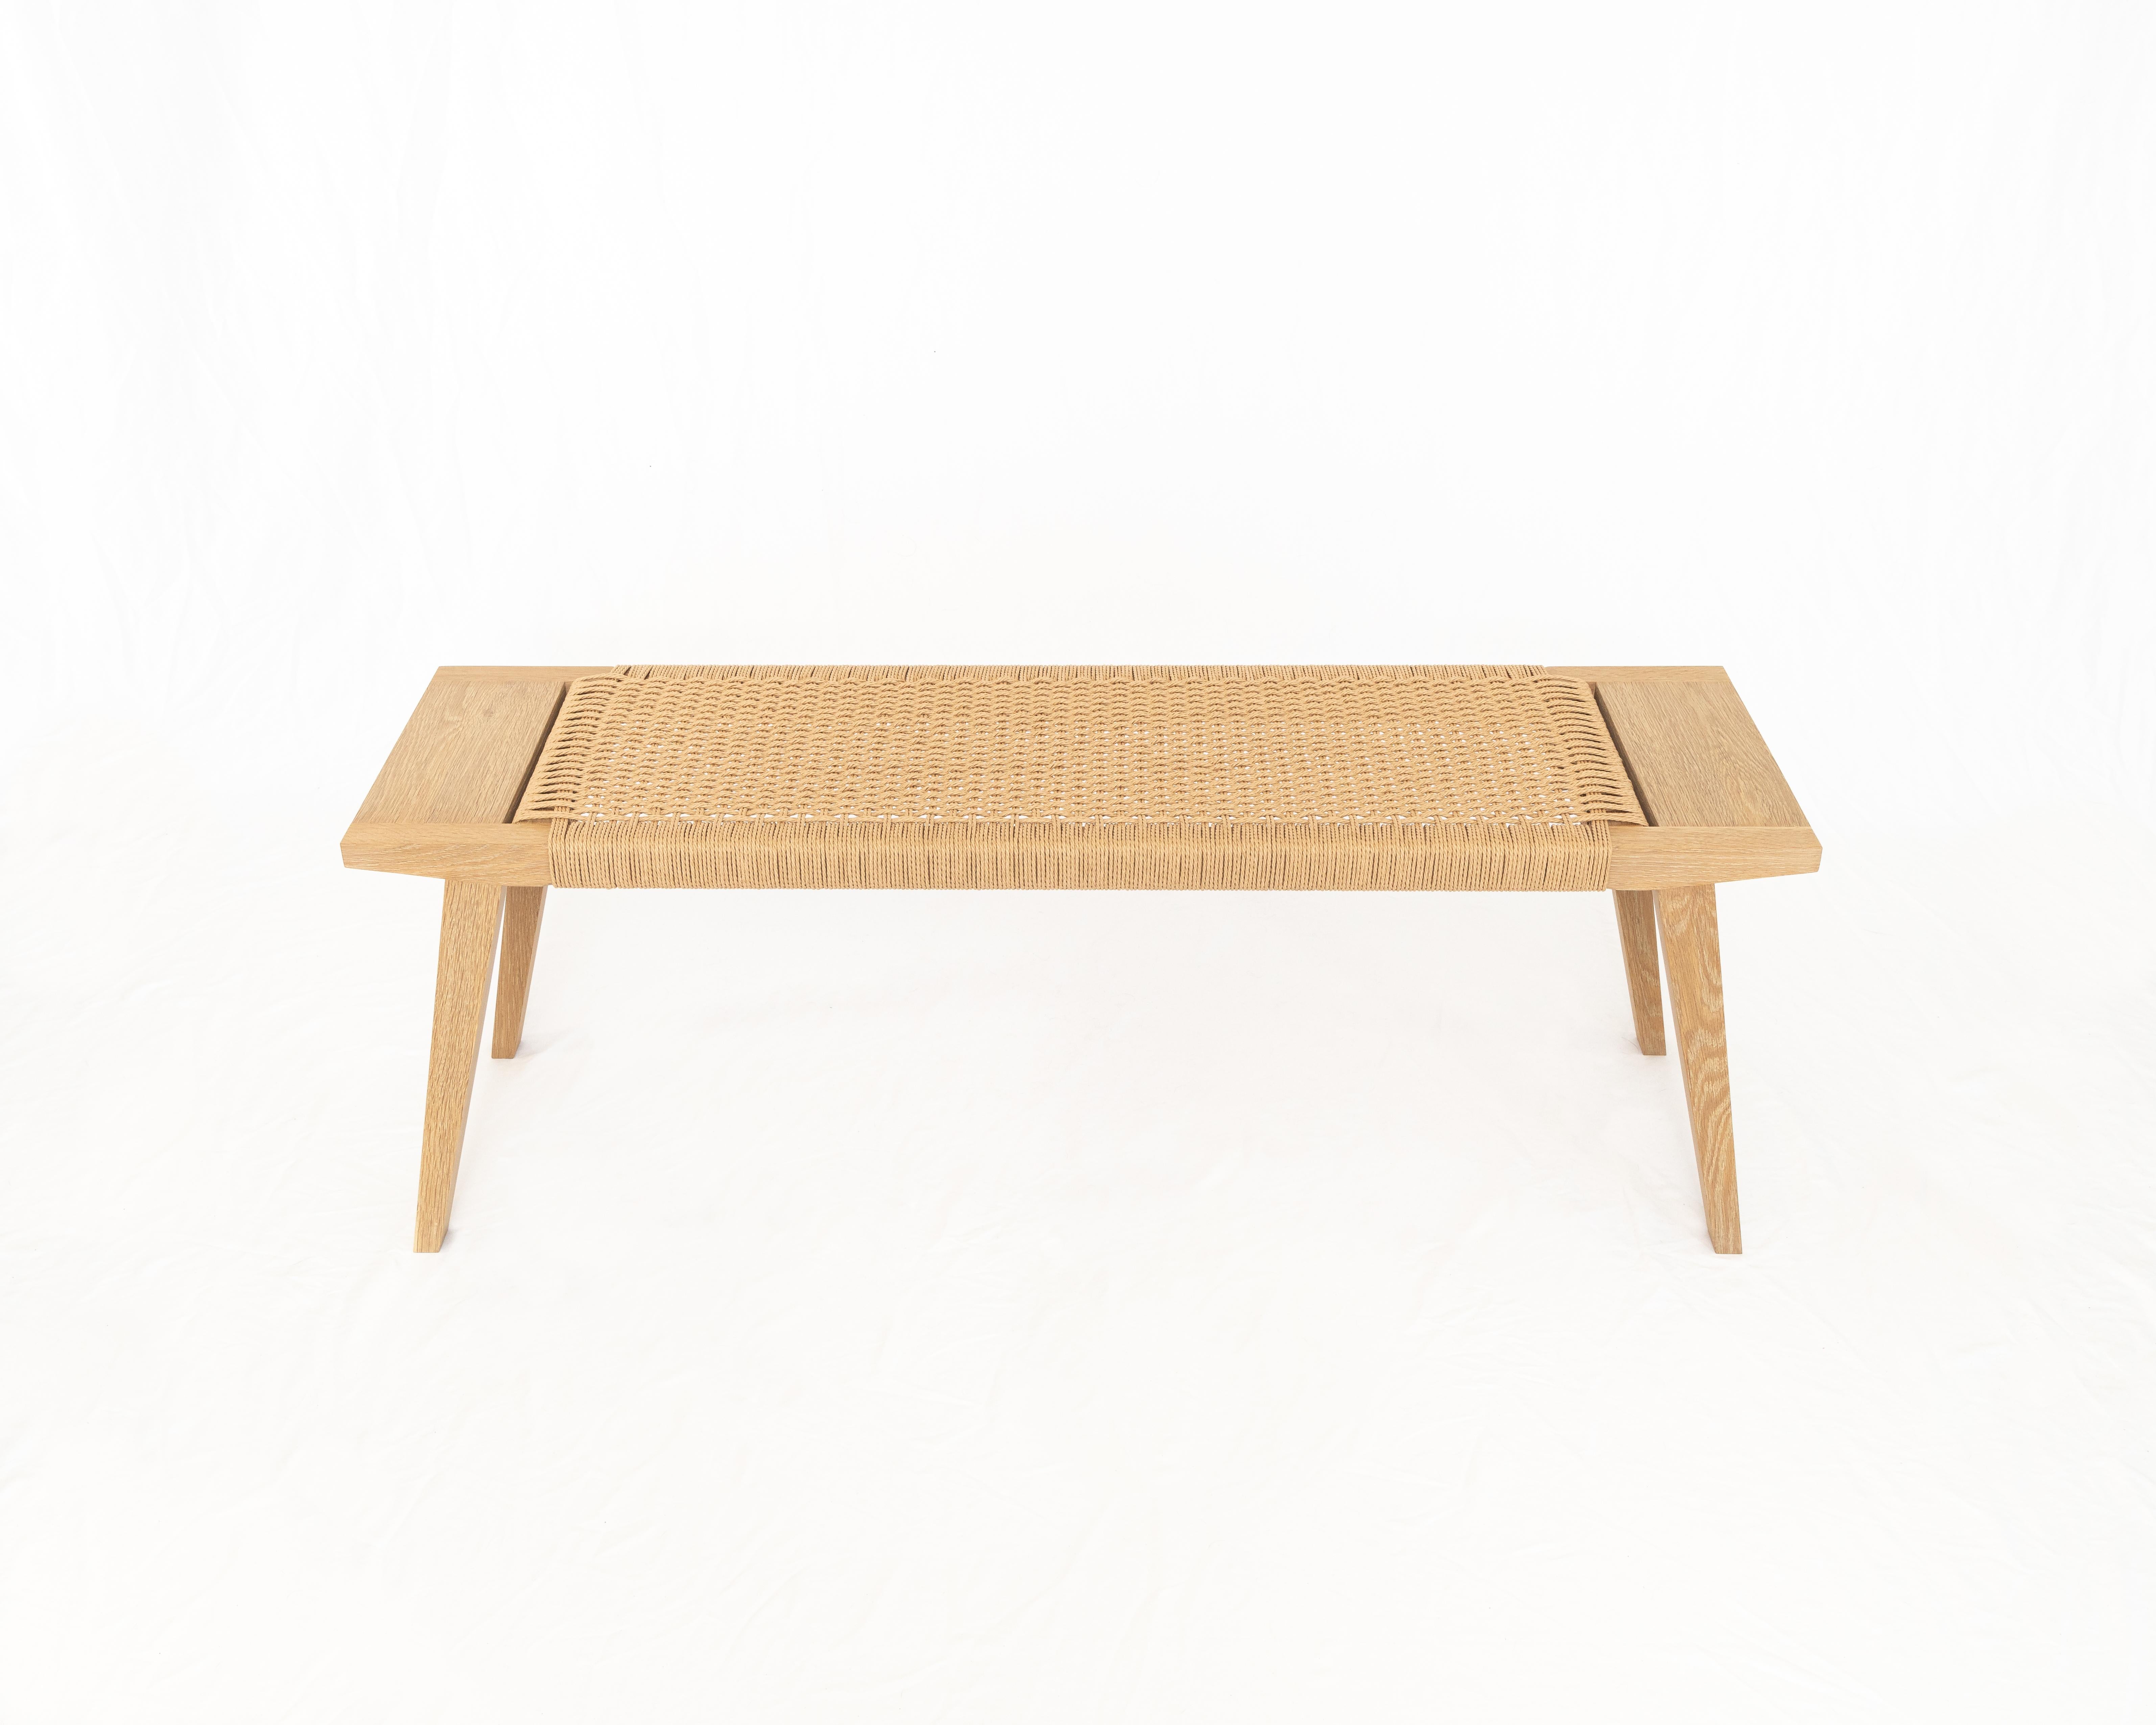 Featuring woven paper cord, sustainable lumber, and modest tapers, the Canva bench explores a love for material and craftsmanship welded with warm welcome. Constructed with a mortice and Tenon frame and handwoven seat, the Canva bench is